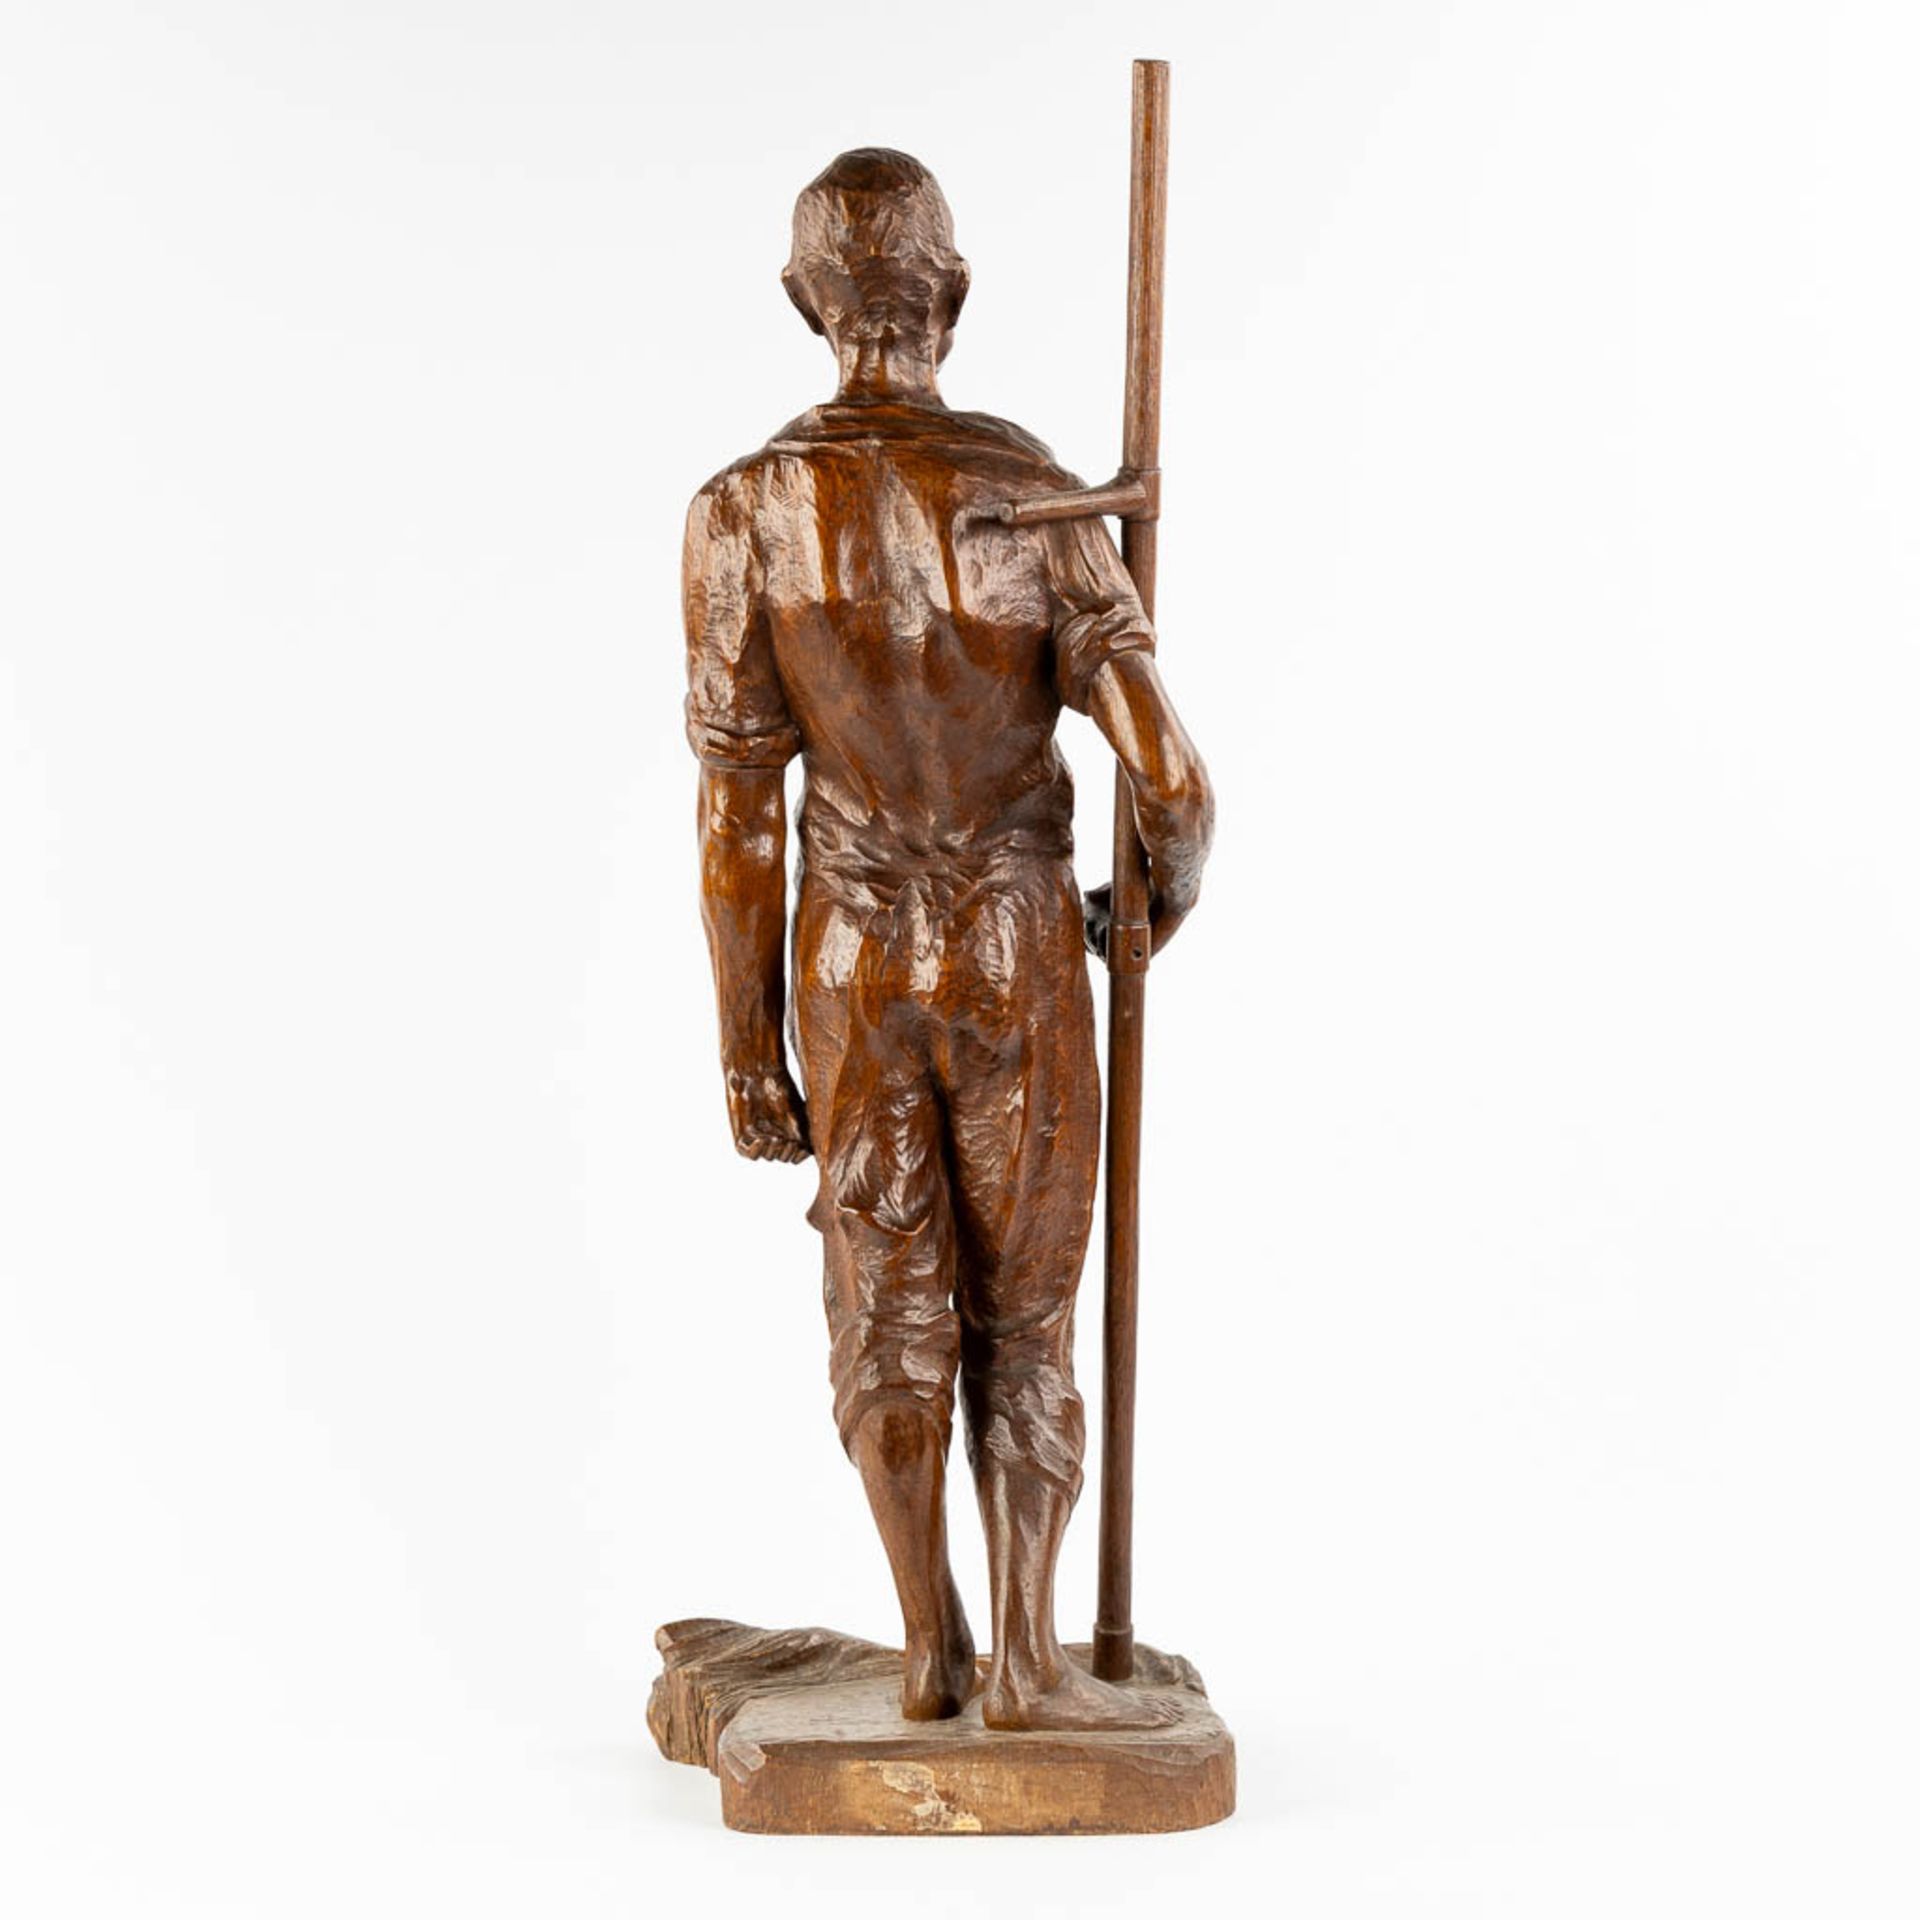 Beaudouin TUERLINCKX (1873-1945) 'Harvester with a scythe' sculptured wood. (L:27 x W:31 x H:90 cm) - Image 3 of 9